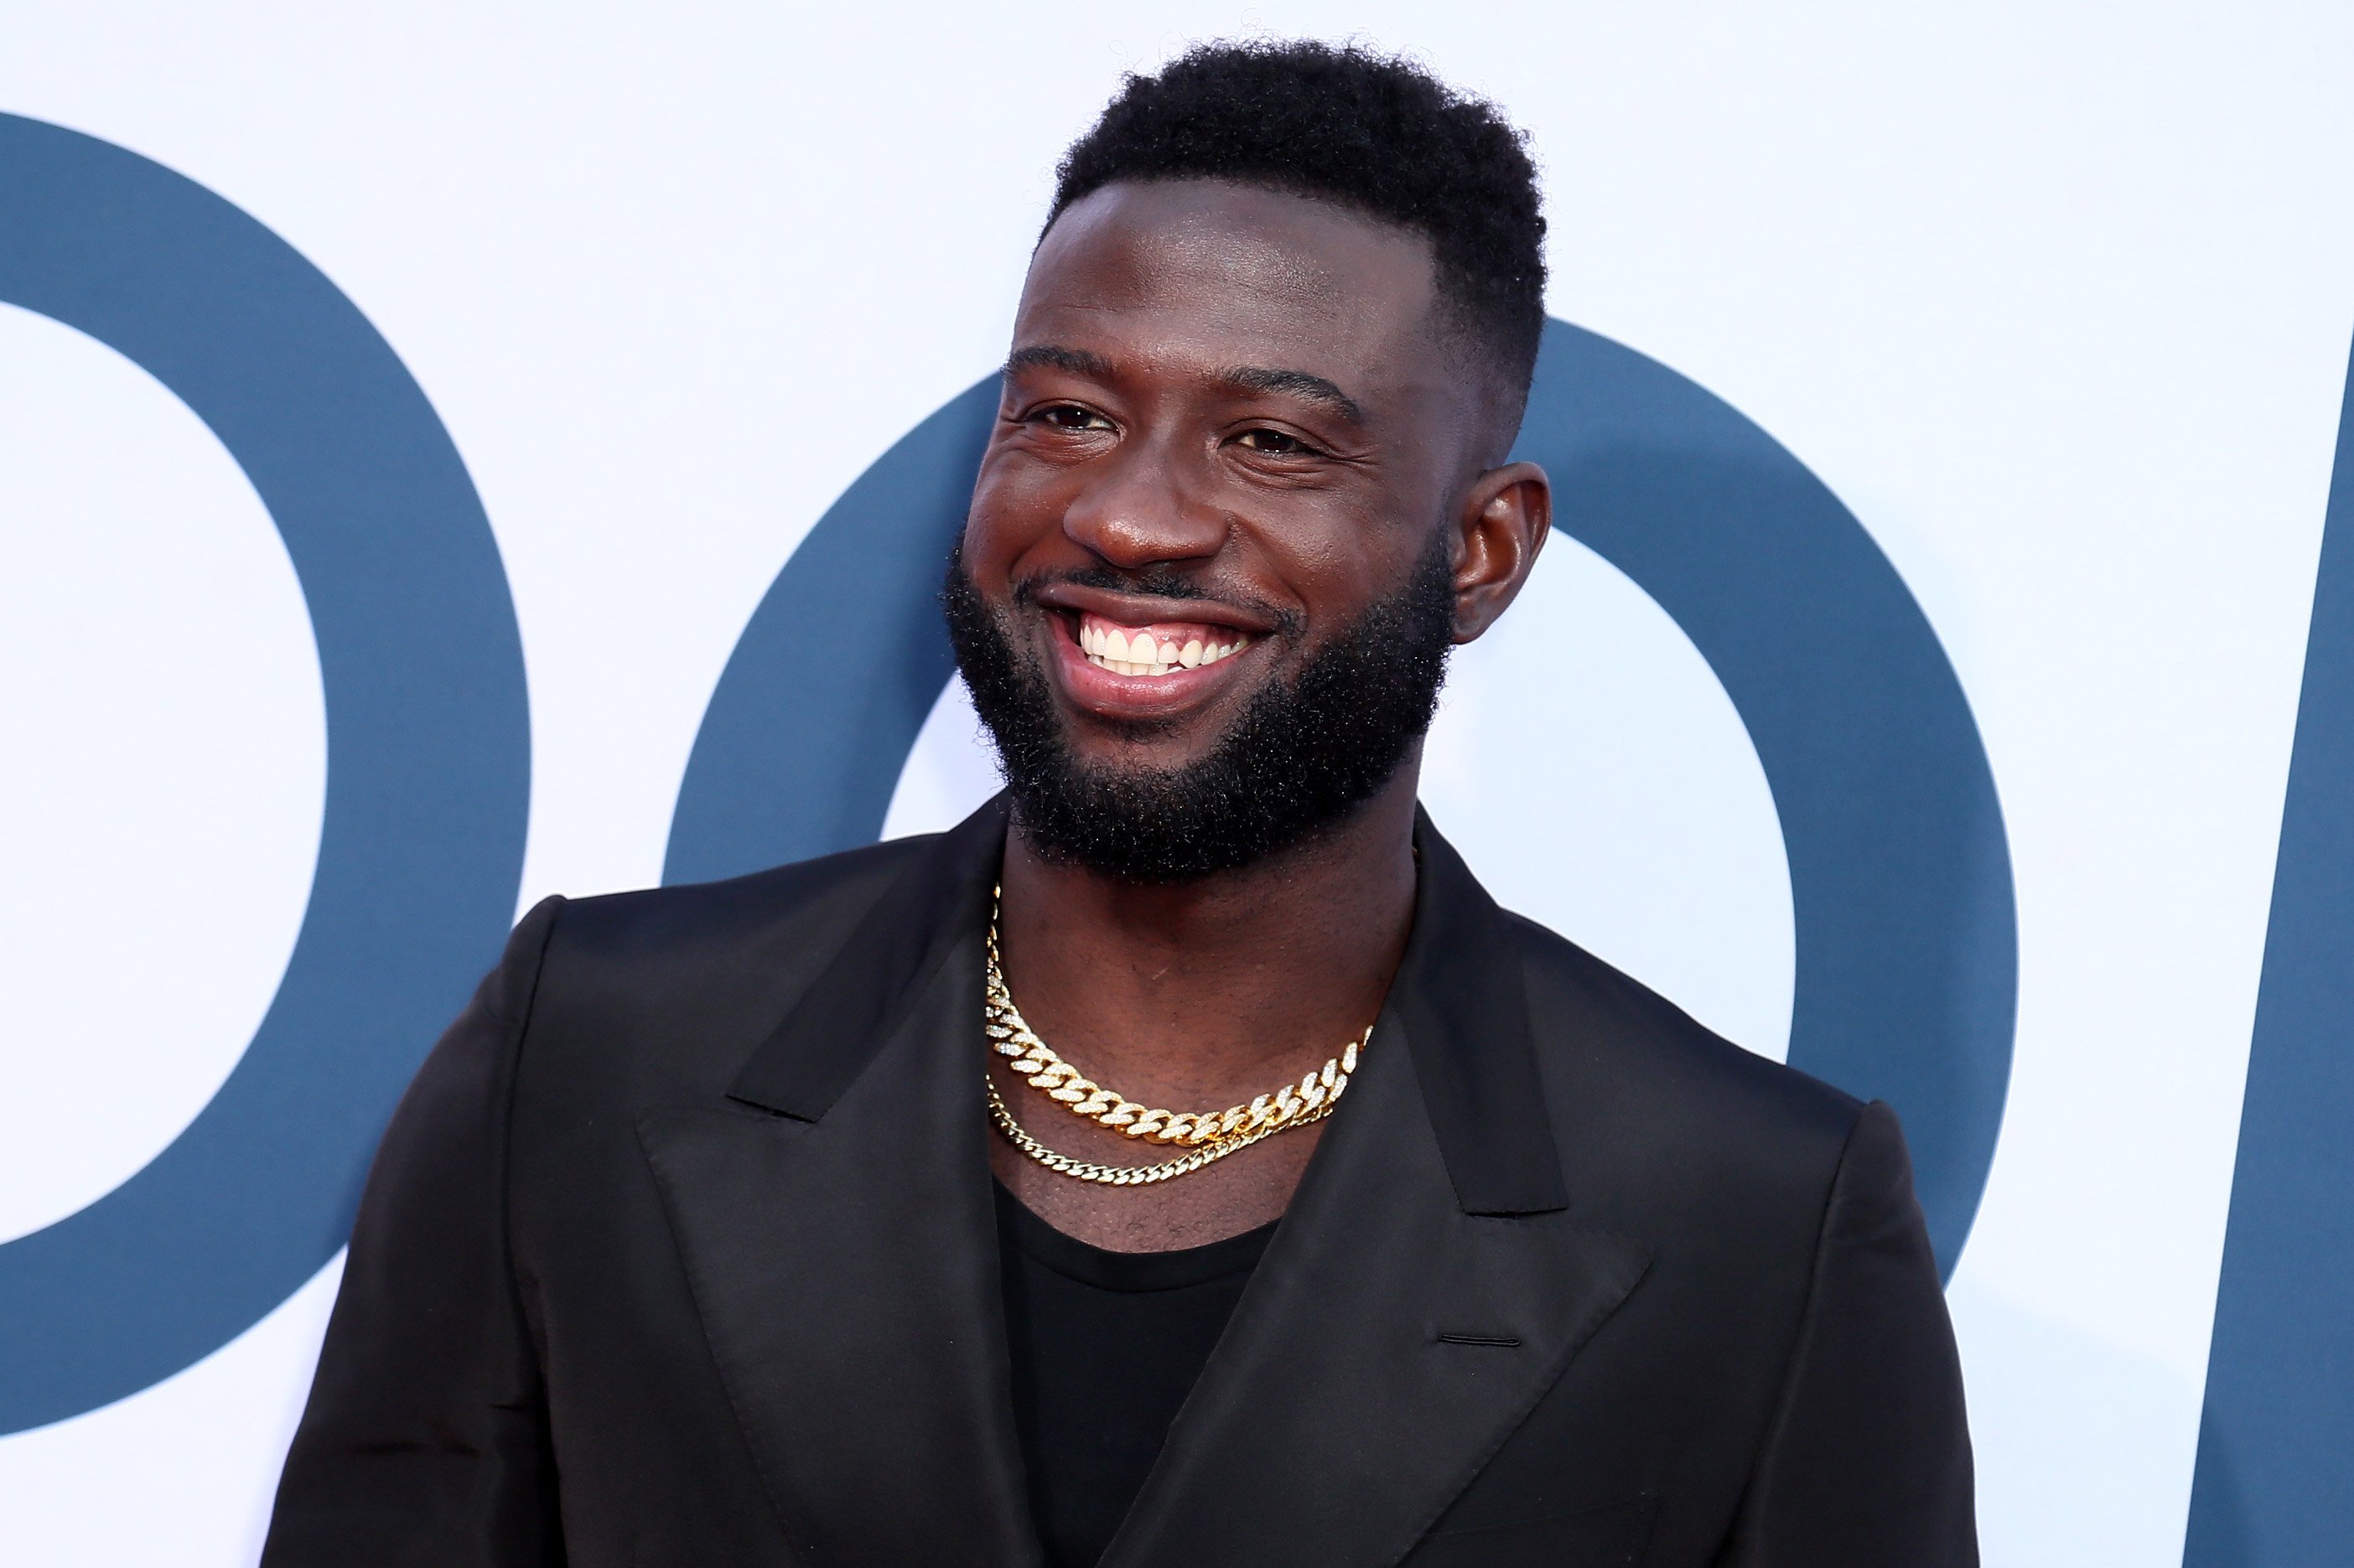 Sinqua Walls attends the Photo Call For Netflix's "Otherhood" at the Egyptian Theatre on July 31, 2019 in Hollywood, California. | Source: Getty Images